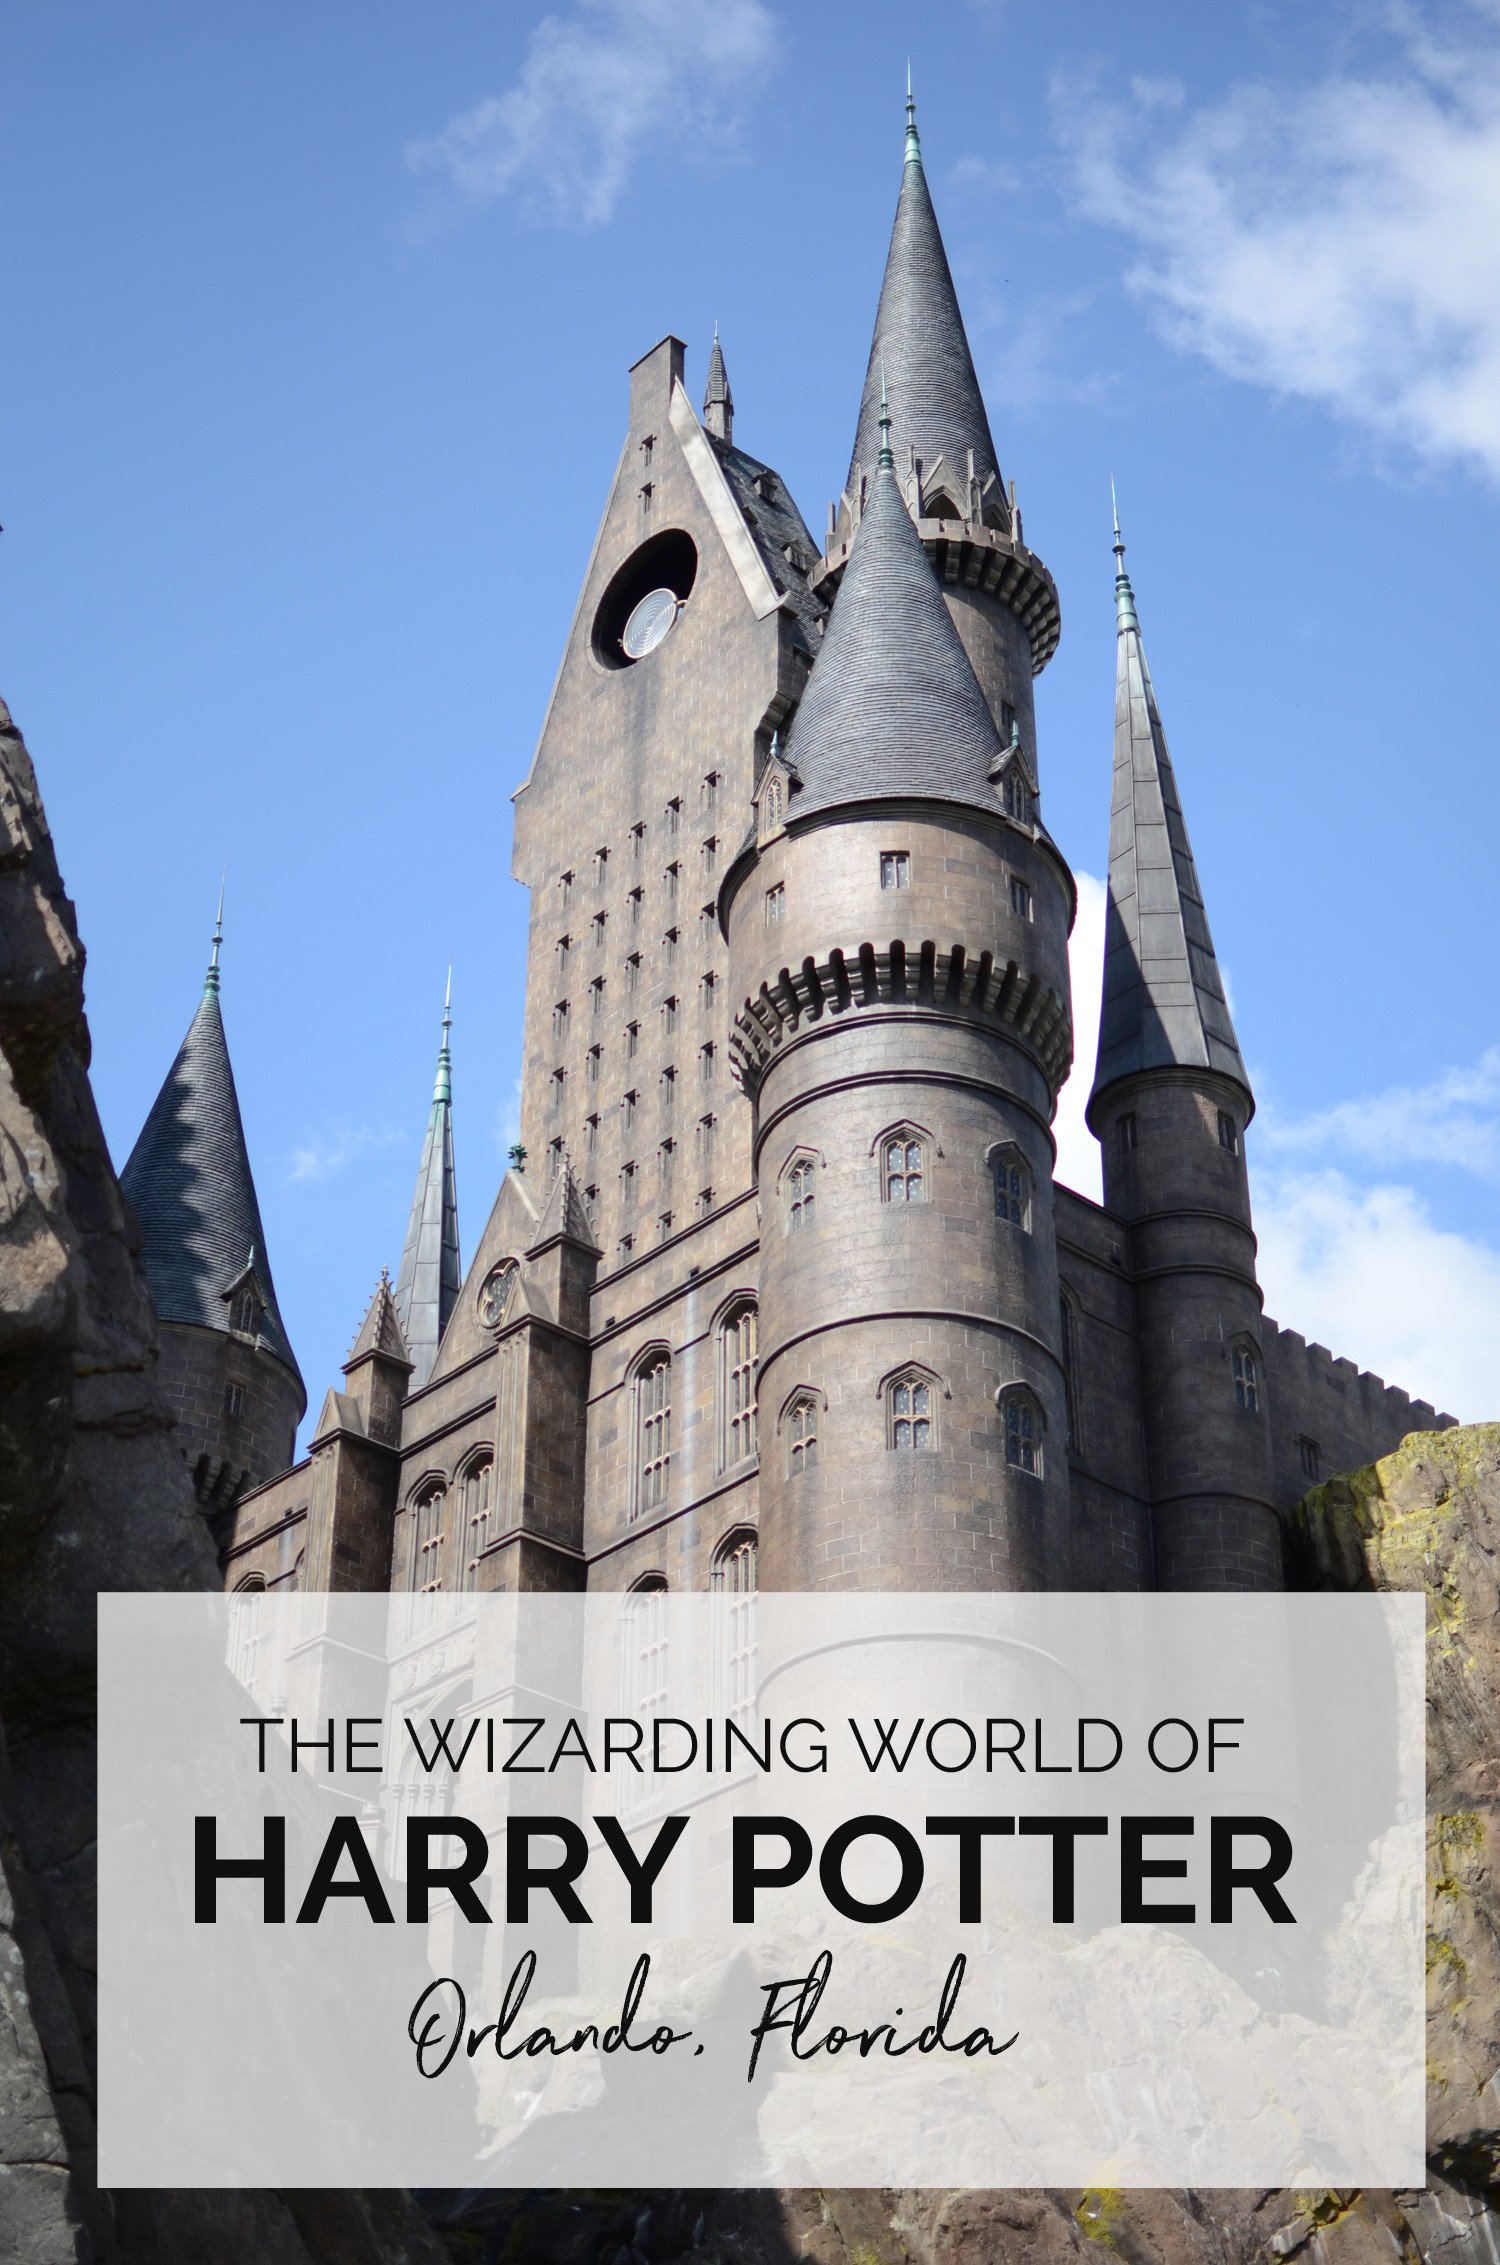 Visiting the Wizarding World of Harry Potter in Orlando, Florida